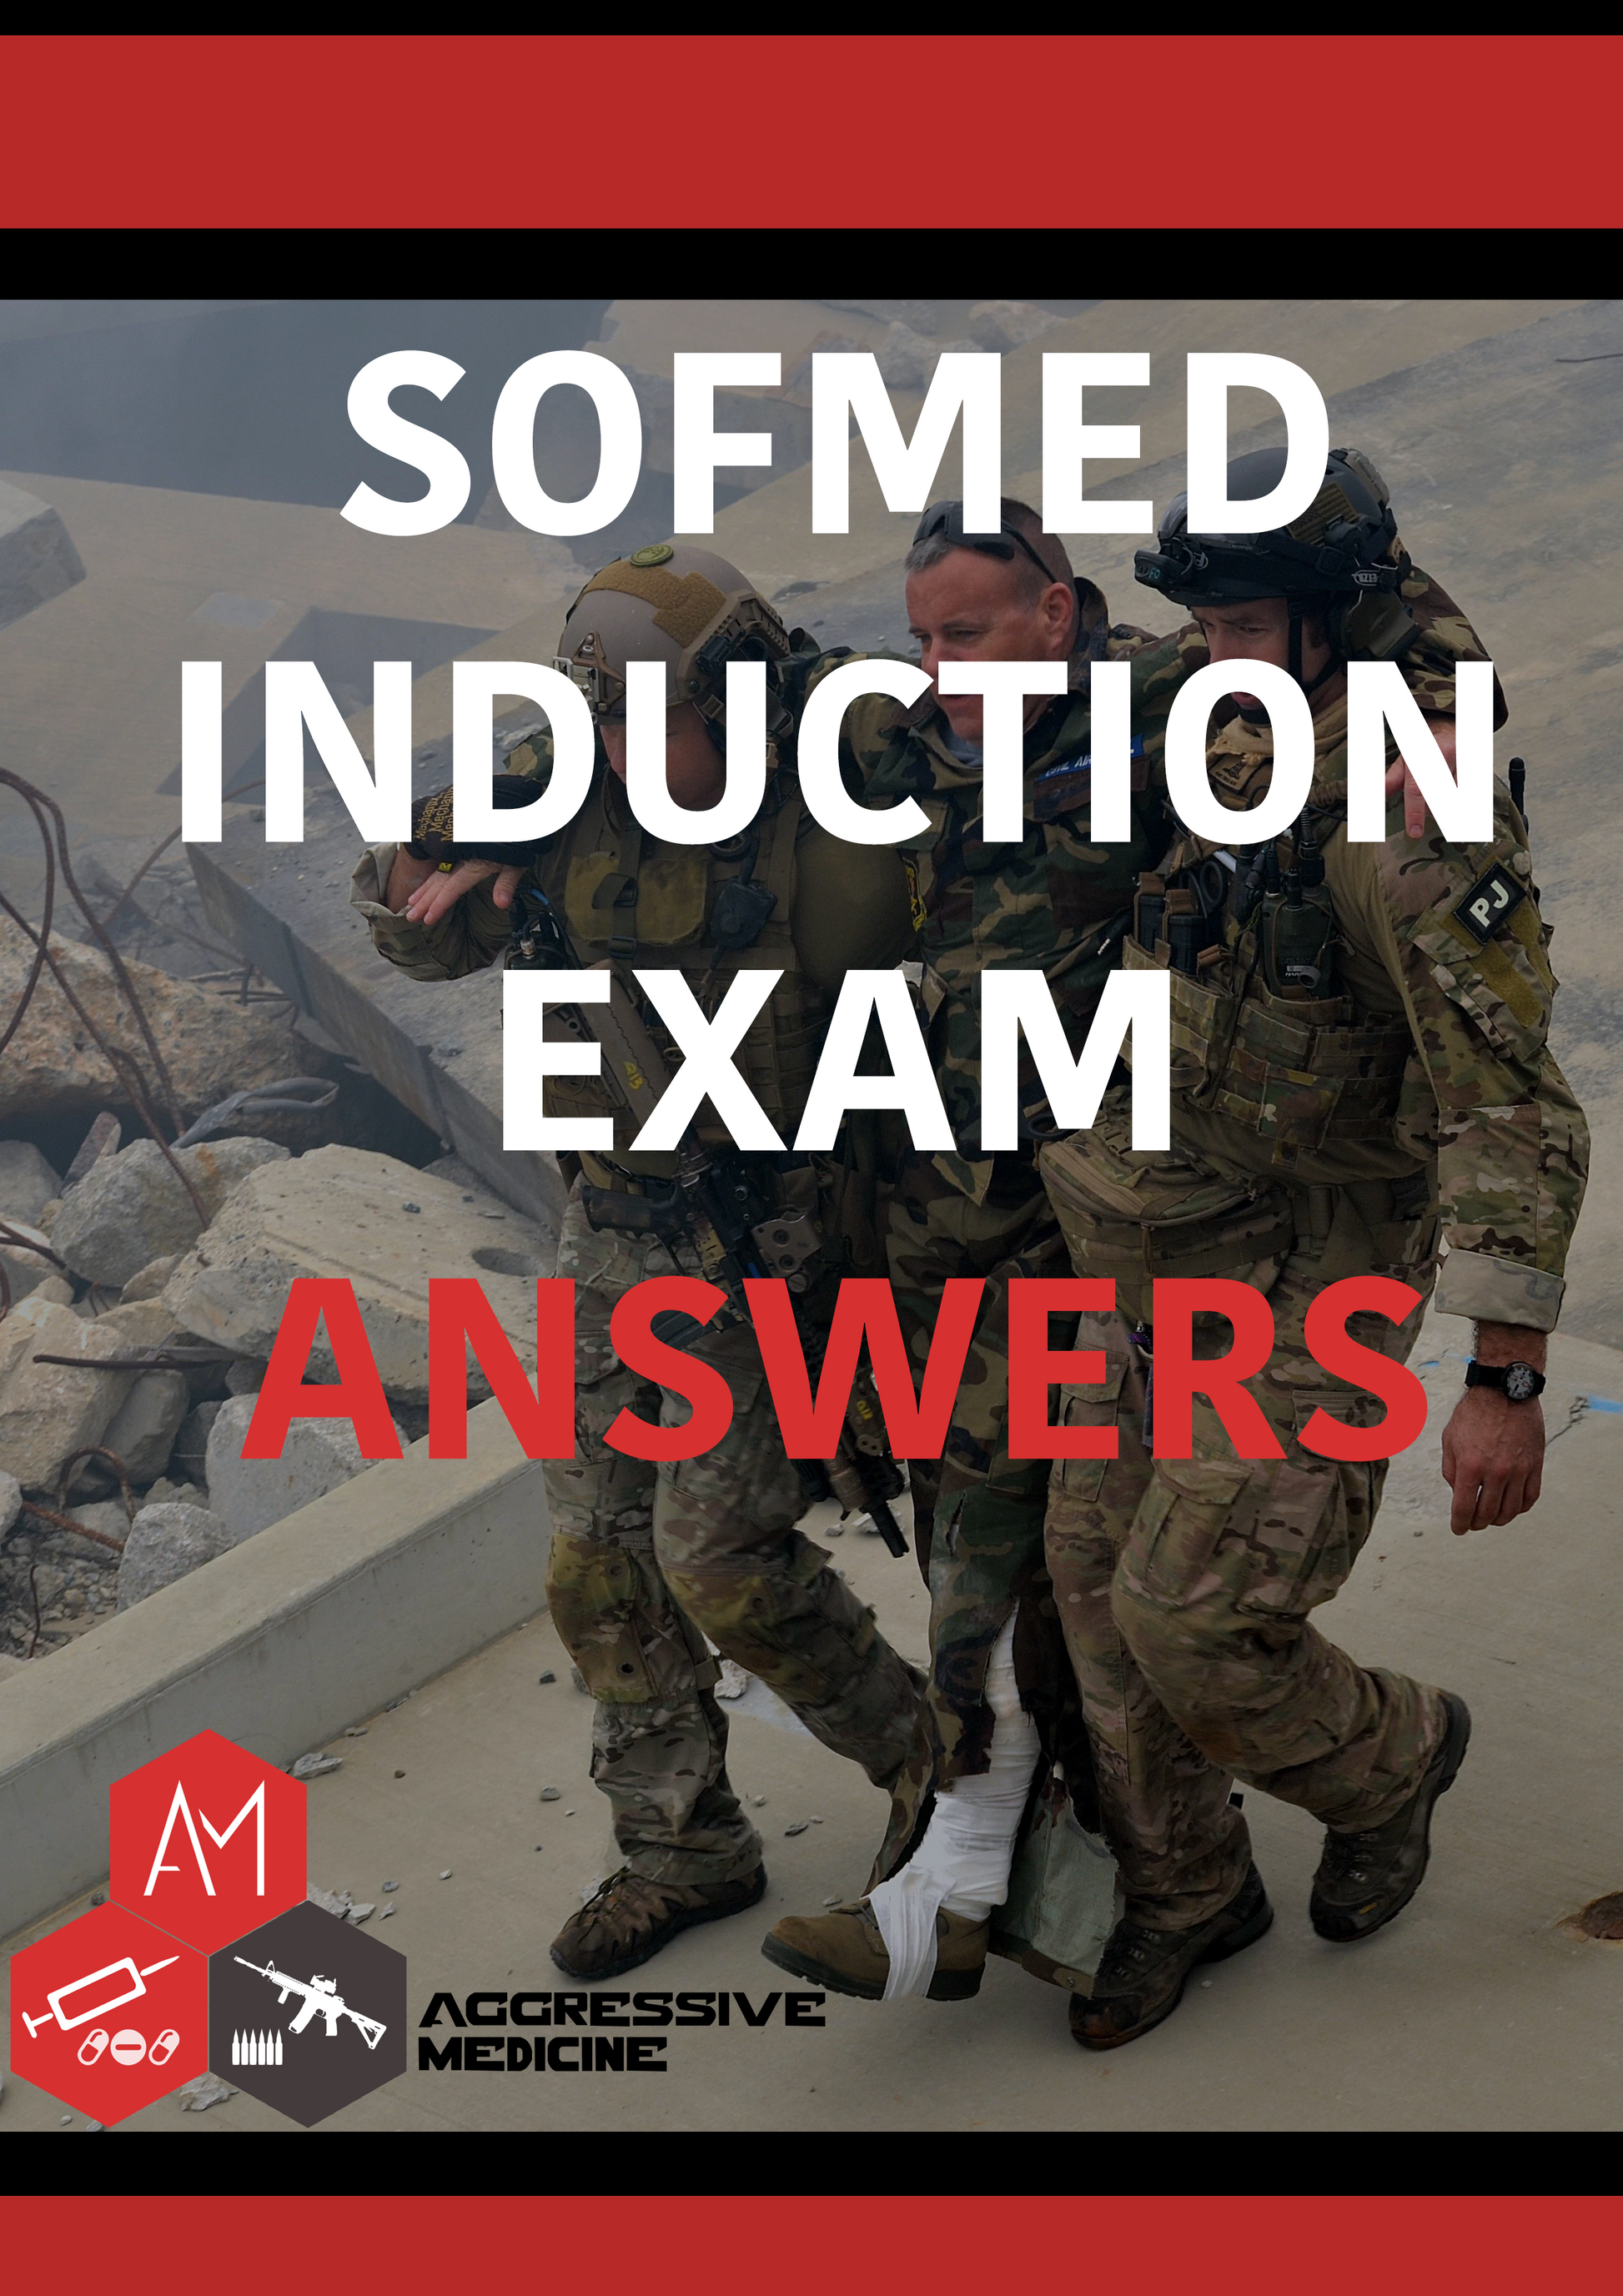 SOFMED Induction Exam with DS Answer Sheet - Aggressive Medicine